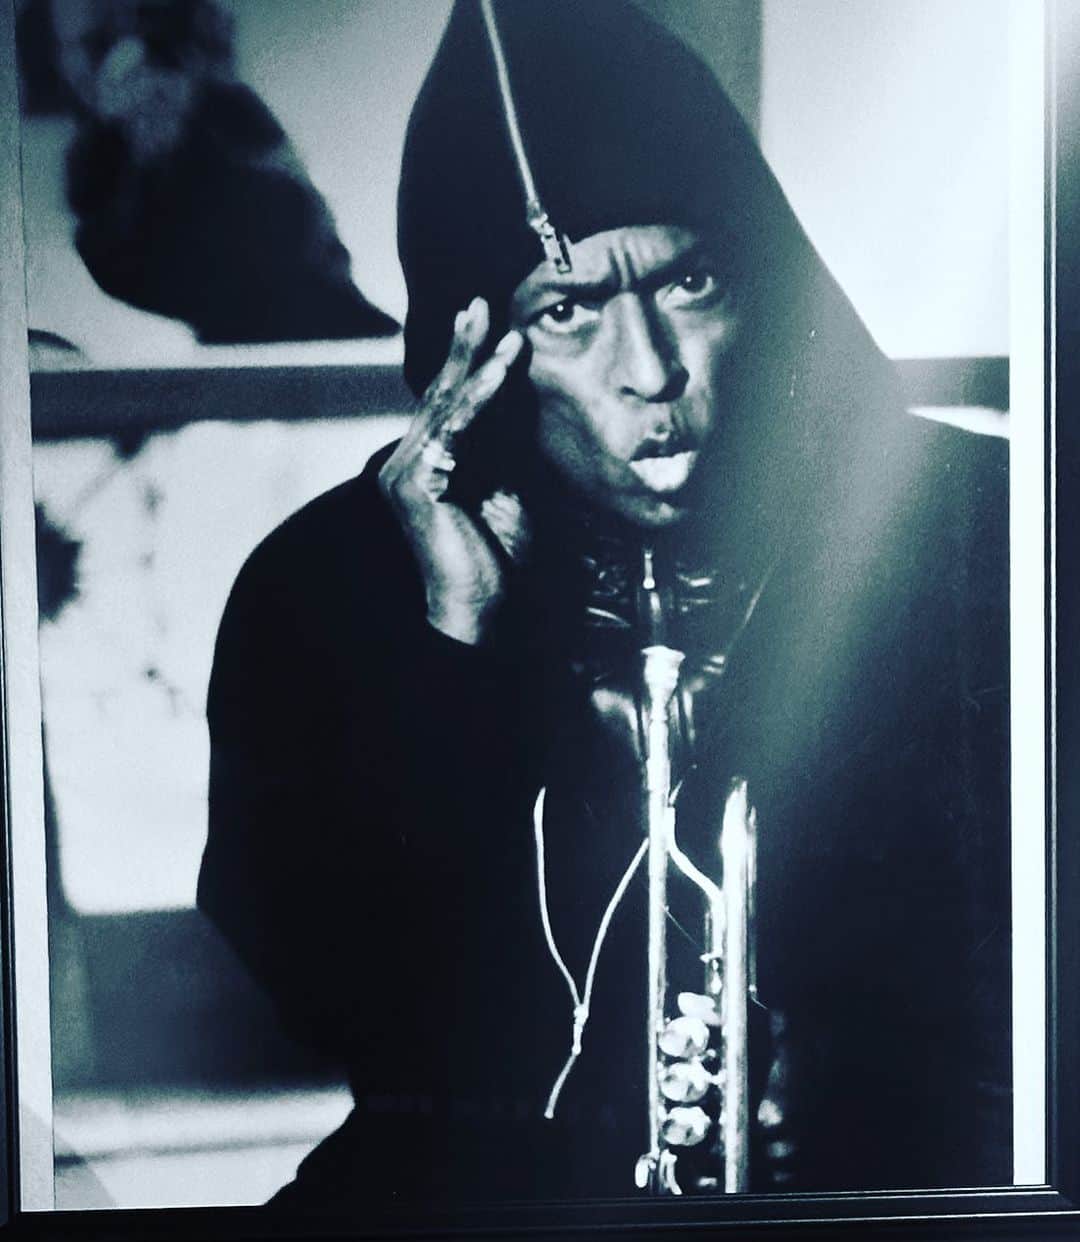 日野賢二のインスタグラム：「Just love this picture of Miles! You can see rare Miles David Photographs @ Absolute Blue ( live house club joint but also got the gallery vibe)  Works of designer  Koshin Satoh (Arrston Volaju) Miles wore his wardrobe and I was wearing them in the 90’s and so did my Father,Marcus,Misia,Cameo,Andy Warhol to name a Few.  About 70 works by costume designer Kohshin Satoh for Miles Davis and Marcus Miller will be exhibited and sold at Absolute Blue!  Most of them are one-of-a-kind items that you can't get anywhere else, such as for exhibitions in Paris. All the works you want to see just by looking at them. Please let me know if you find something you want for your stage costume or everyday use. We will discuss the price with you 😊✨💖  [Date and time] 7/26 (Wed)-29 (Sat) 11:00-21:00 [Venue] Ikebukuro Ekimae Live House "Absolute Blue" 　　　　https://absol.blue [Address] 1-15-6 Nishi-Ikebukuro, Toshima-ku, Tokyo 171-0021 Toshima Kaikan B2F [Tel] 03-5904-8576  ★Reservations are not required. Please come along 😊  ▼Kohshin Satoh https://www.kohshinsatoh.jp/about-me  [Designer Sato Koshin] Kohshin Satoh Established Arrston Volaju Co., Ltd. in 1975. He has attracted attention for his free-spirited and fresh designs that break the conventional concepts and common sense of the fashion world.  Since 1983, he has participated in the Tokyo Collection, sparking a men's designer brand boom.  Its momentum has developed into a social phenomenon, influencing not only the clothing industry, but also youth customs and many other industries.  He was highly regarded overseas as a leading Japanese menswear designer, and was worn by world-famous superstars such as jazz trumpeter Miles Davis and famous pop art artist Andy Warhol.  Since 1986, he has participated in two major collections in Paris and New York, and has established his position as a world-famous designer both in name and reality.  He is also talented in interior design, wristwatches, objects, and graphics.」